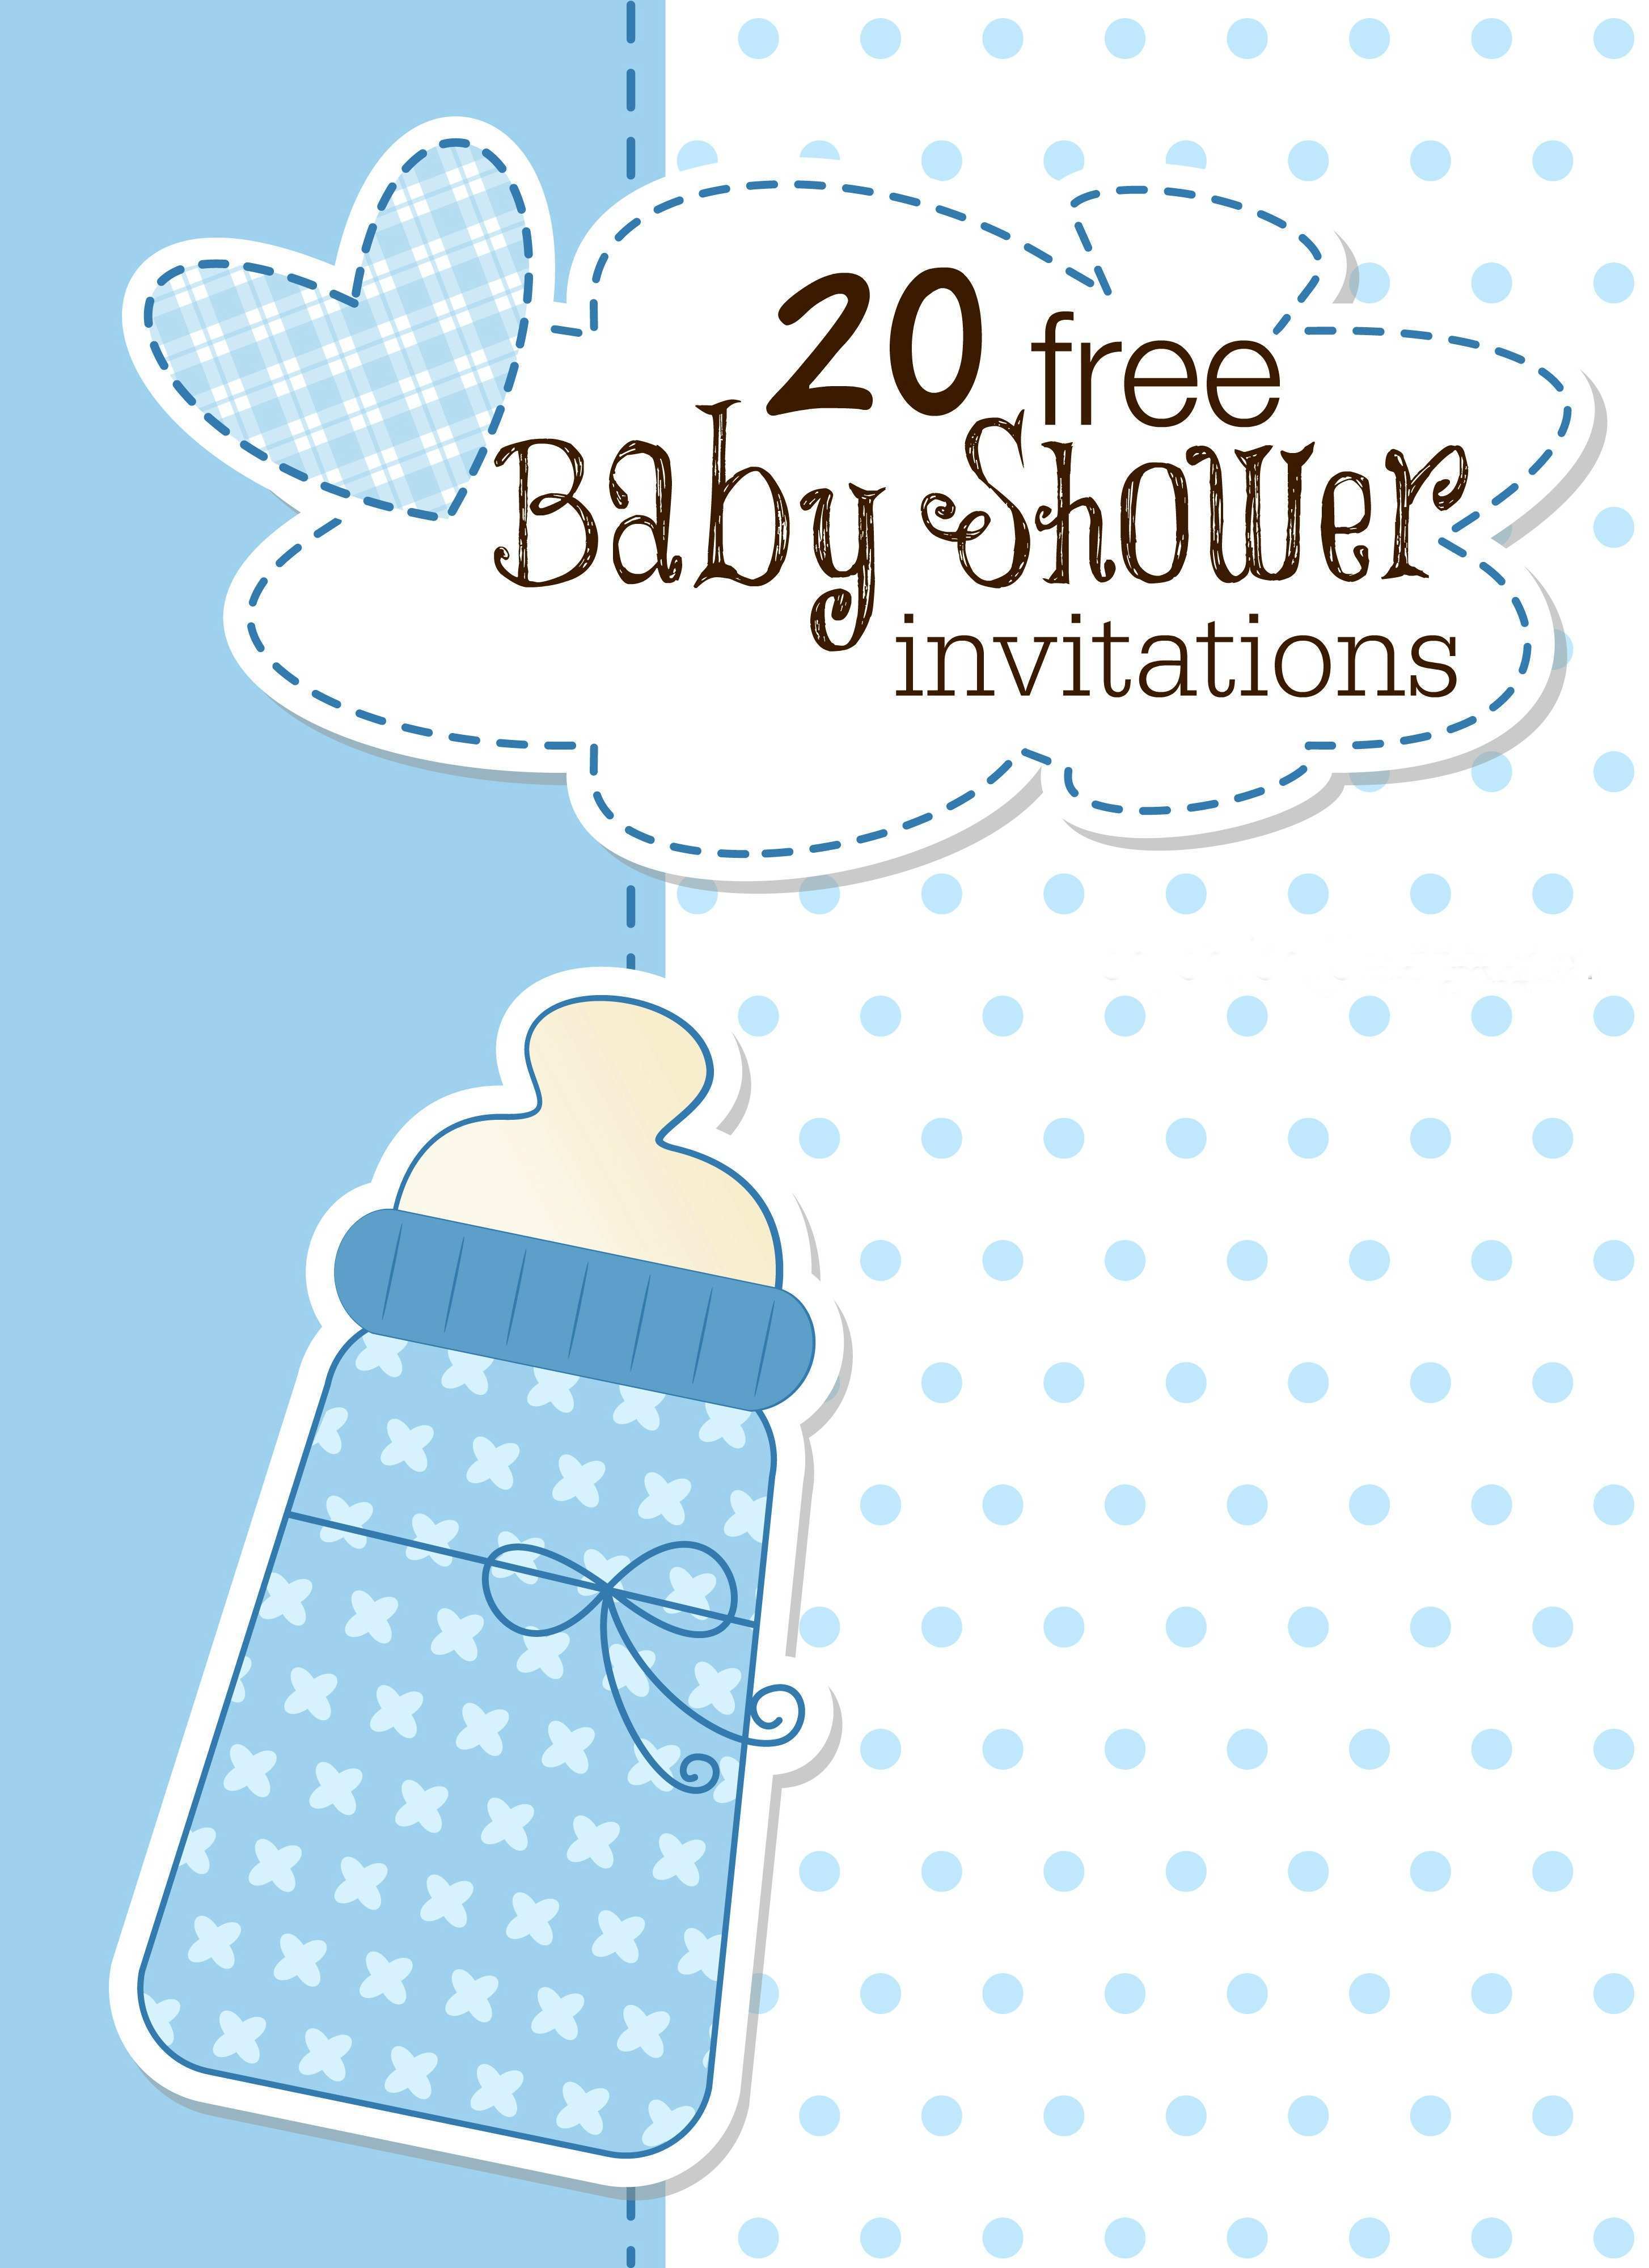 99 Adding Baby Shower Flyers Free Templates in Photoshop with Baby Shower Flyers Free Templates